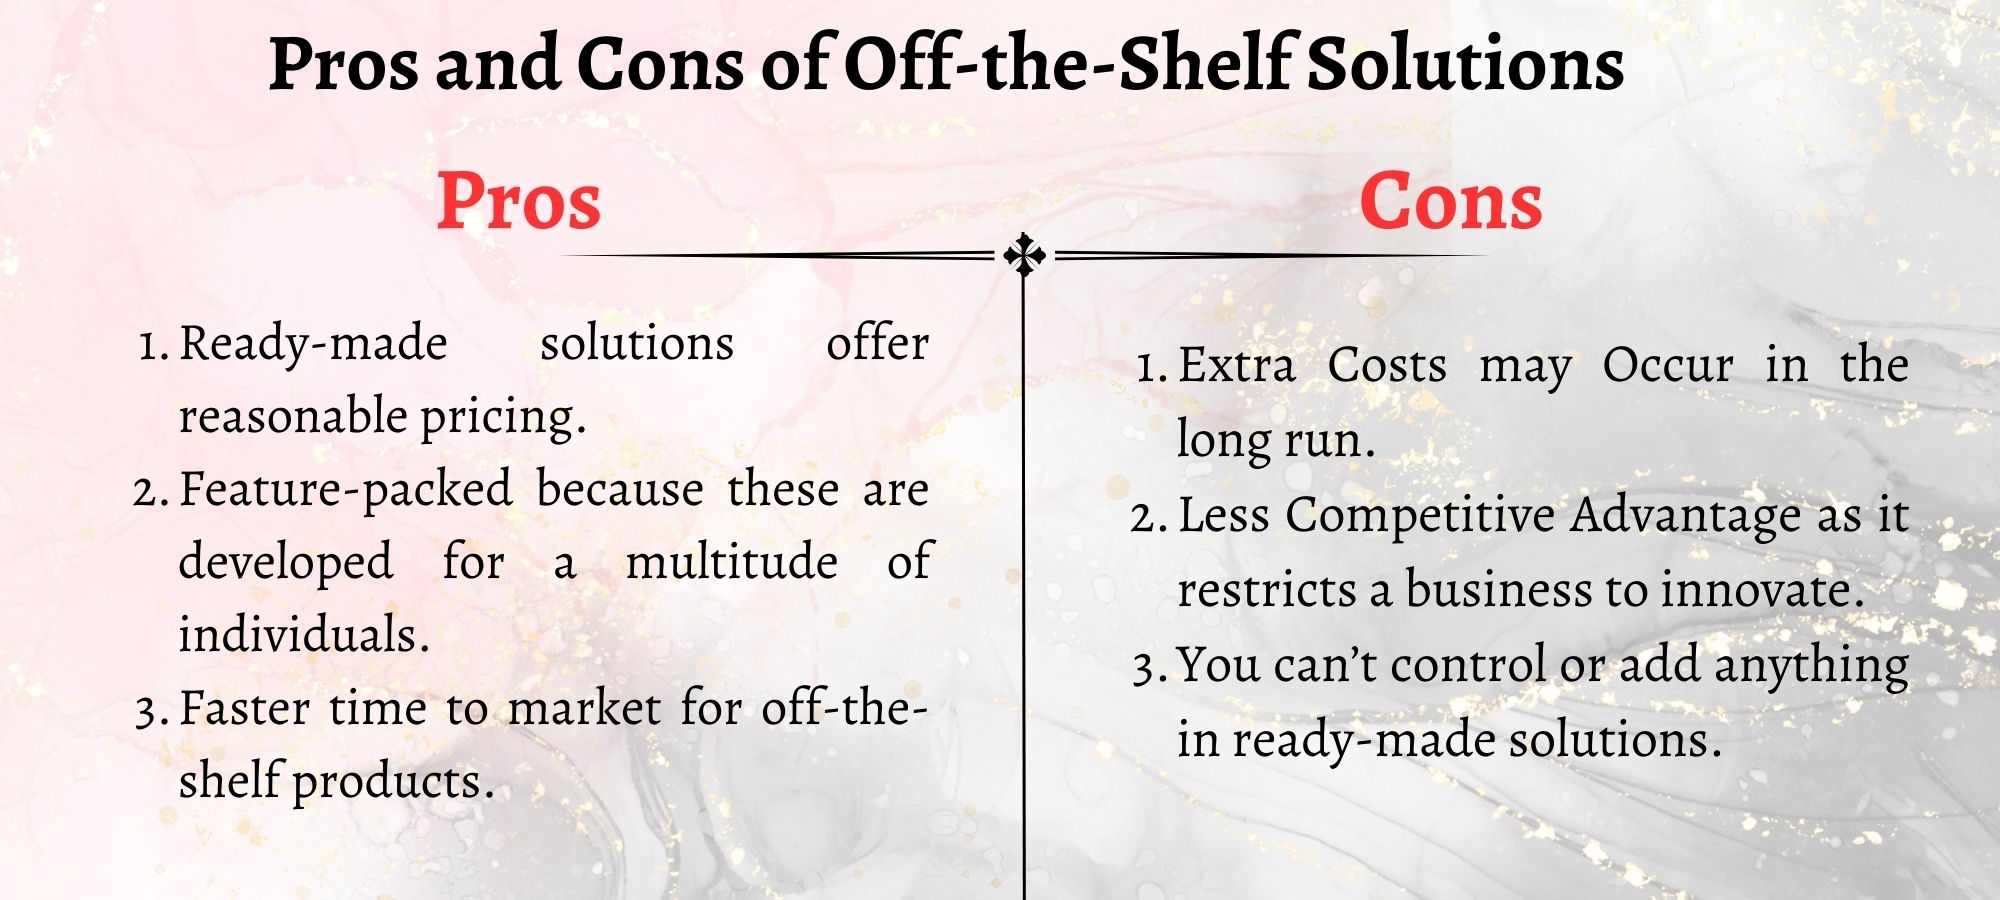 Pros and Cons of Off-the-Shelf Solutions